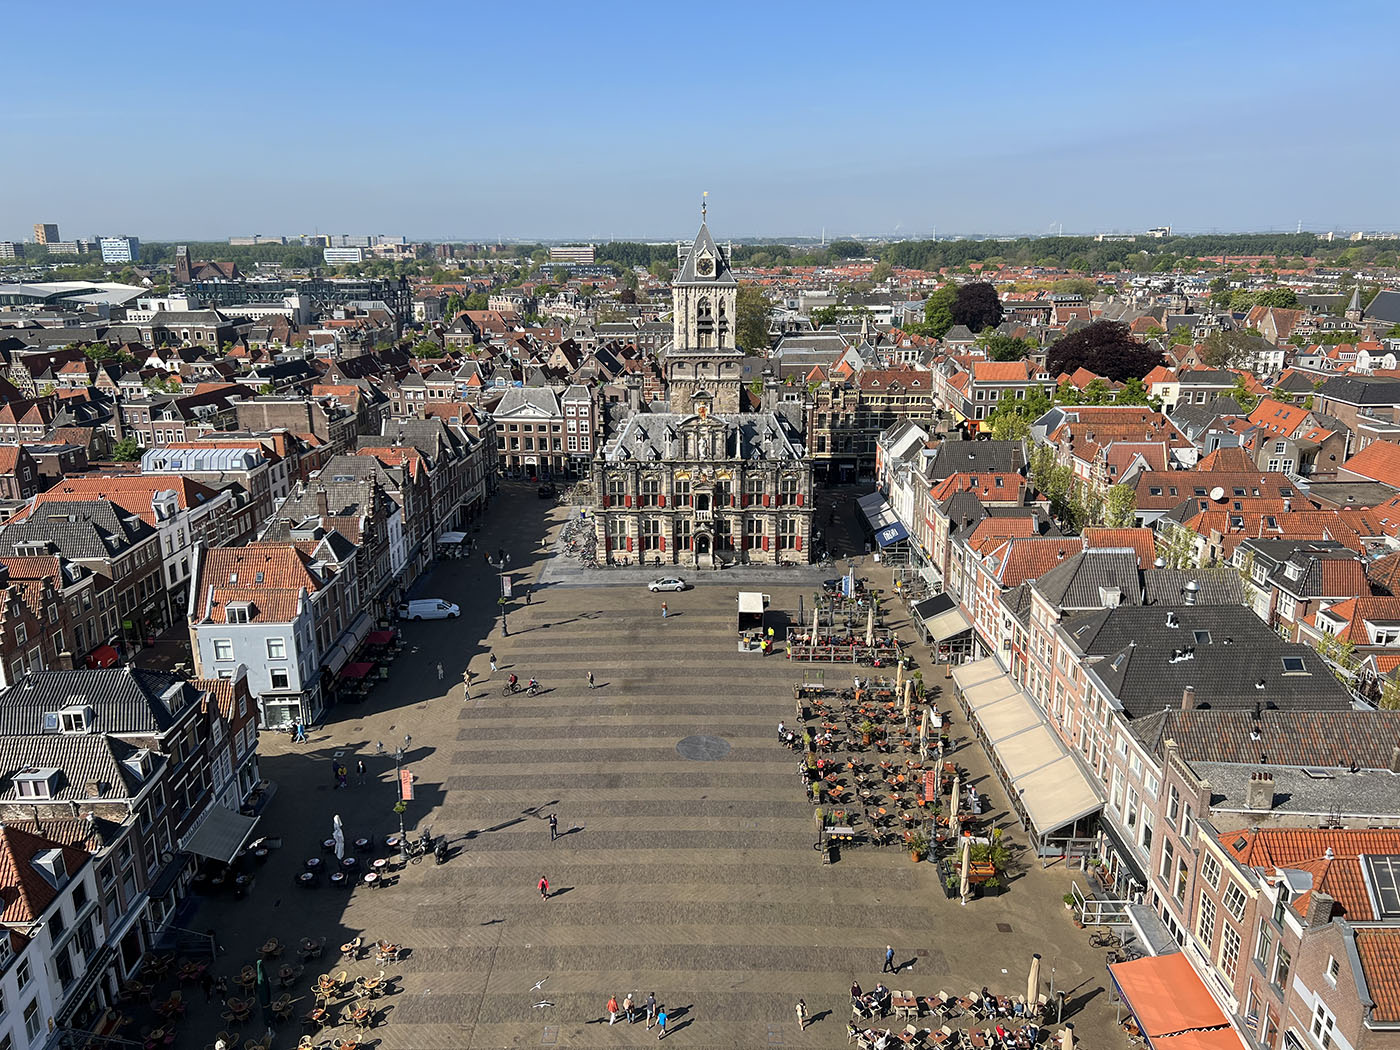 View from the tower of the New Church. Delft, Netherlands. Credit: Carolina Valenzuela